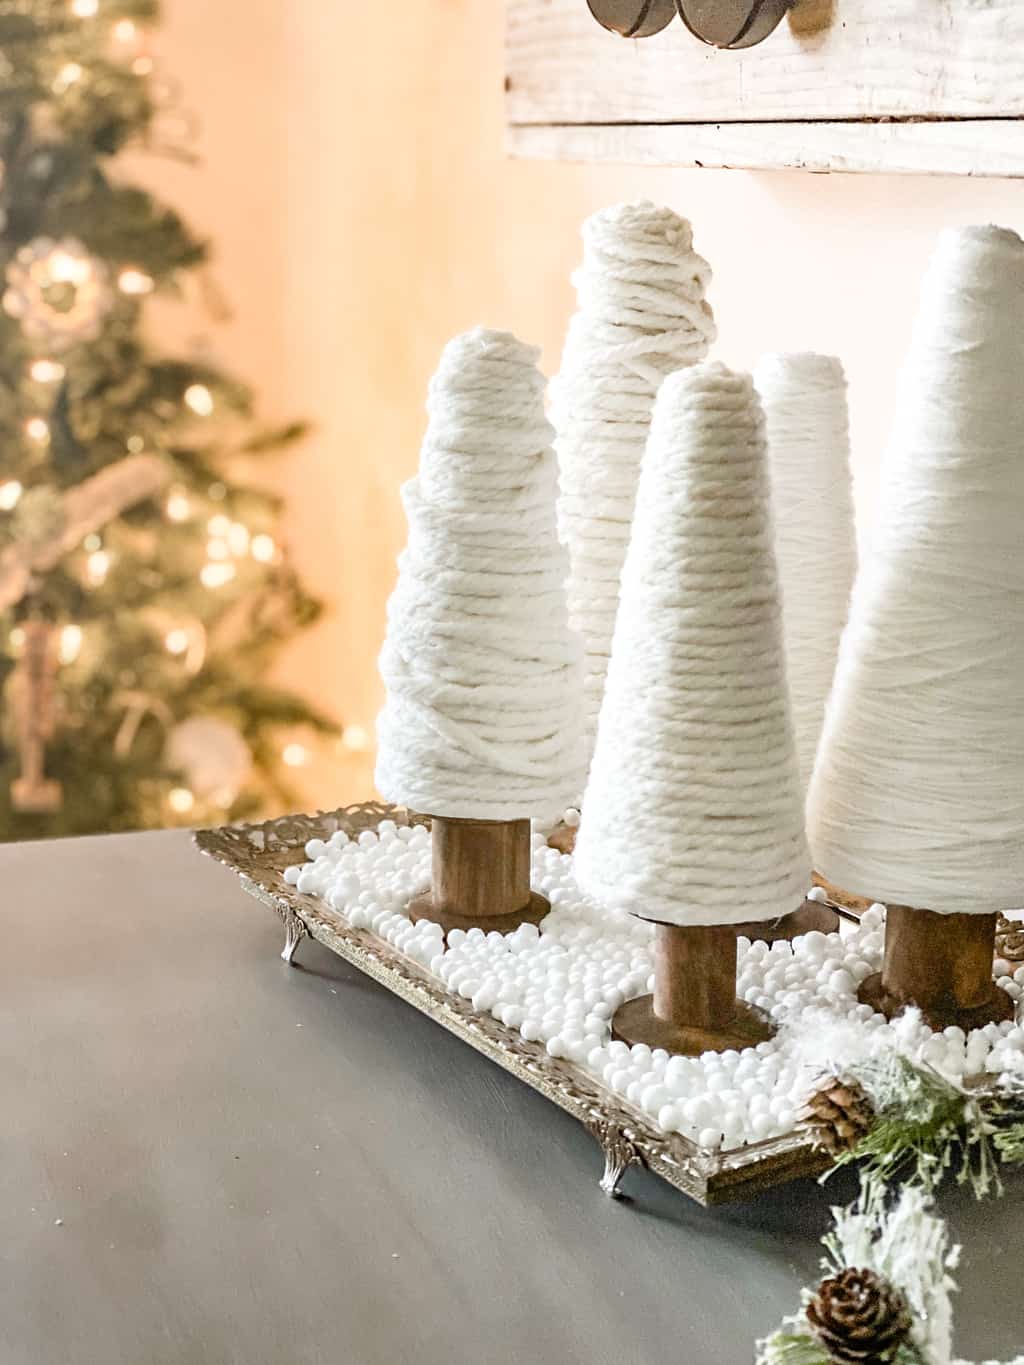 Christmas trees come in all shapes, sizes and colors, but these upcycled ribbon spool Christmas trees might be the cutest ones of all. 